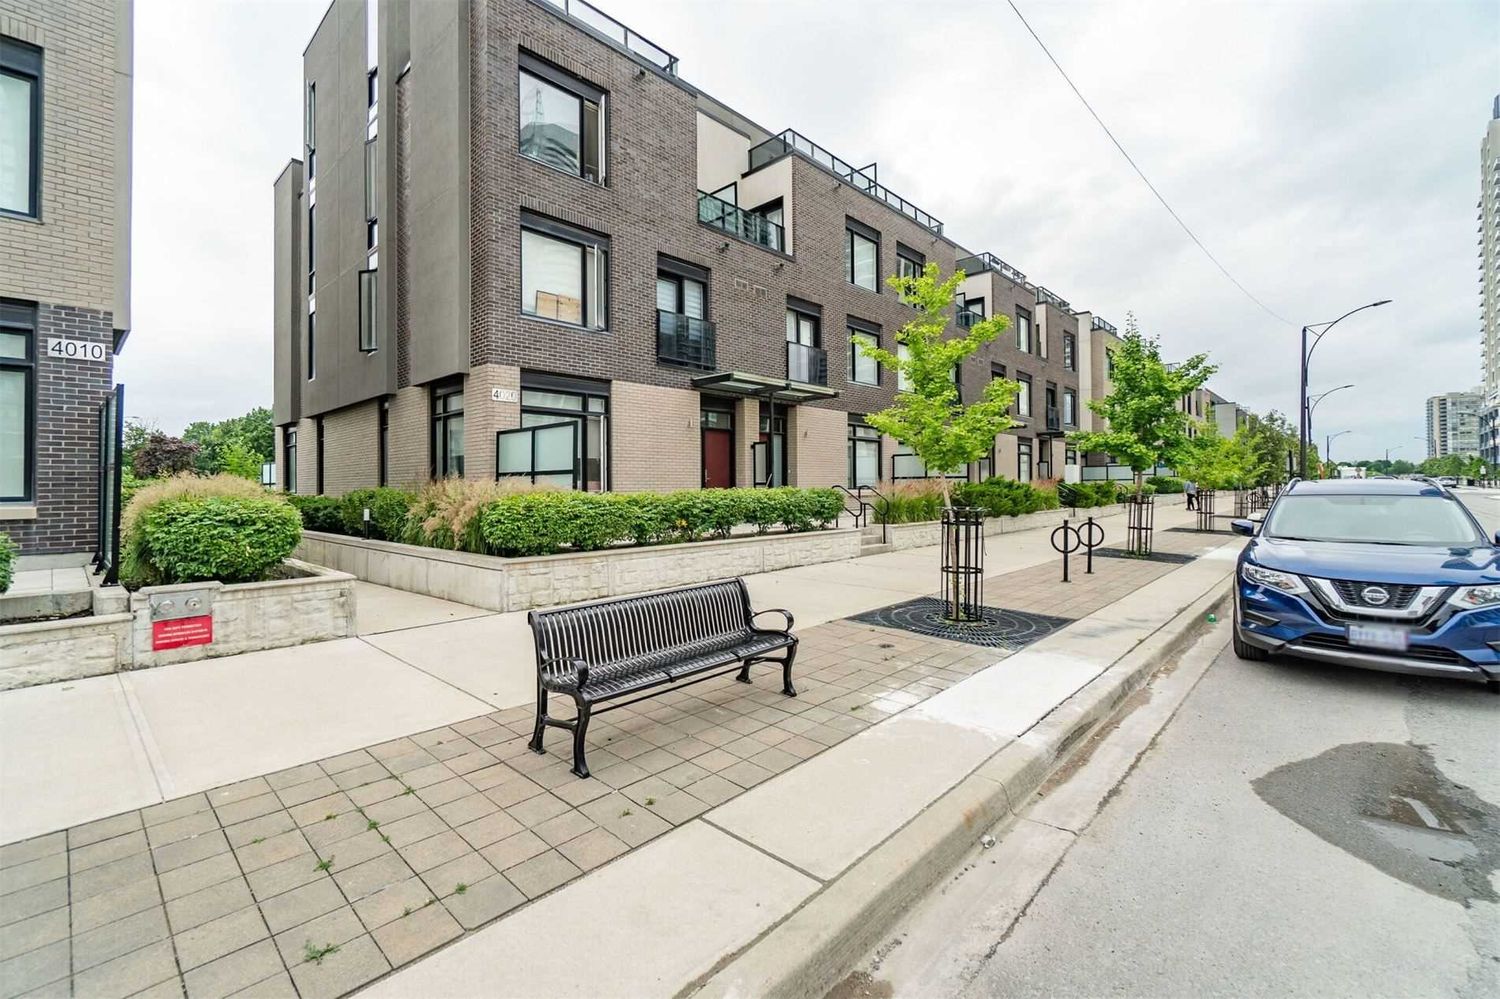 4010-4080 Parkside Village Drive. 4080 Parkside Village Townhomes is located in  Mississauga, Toronto - image #1 of 3